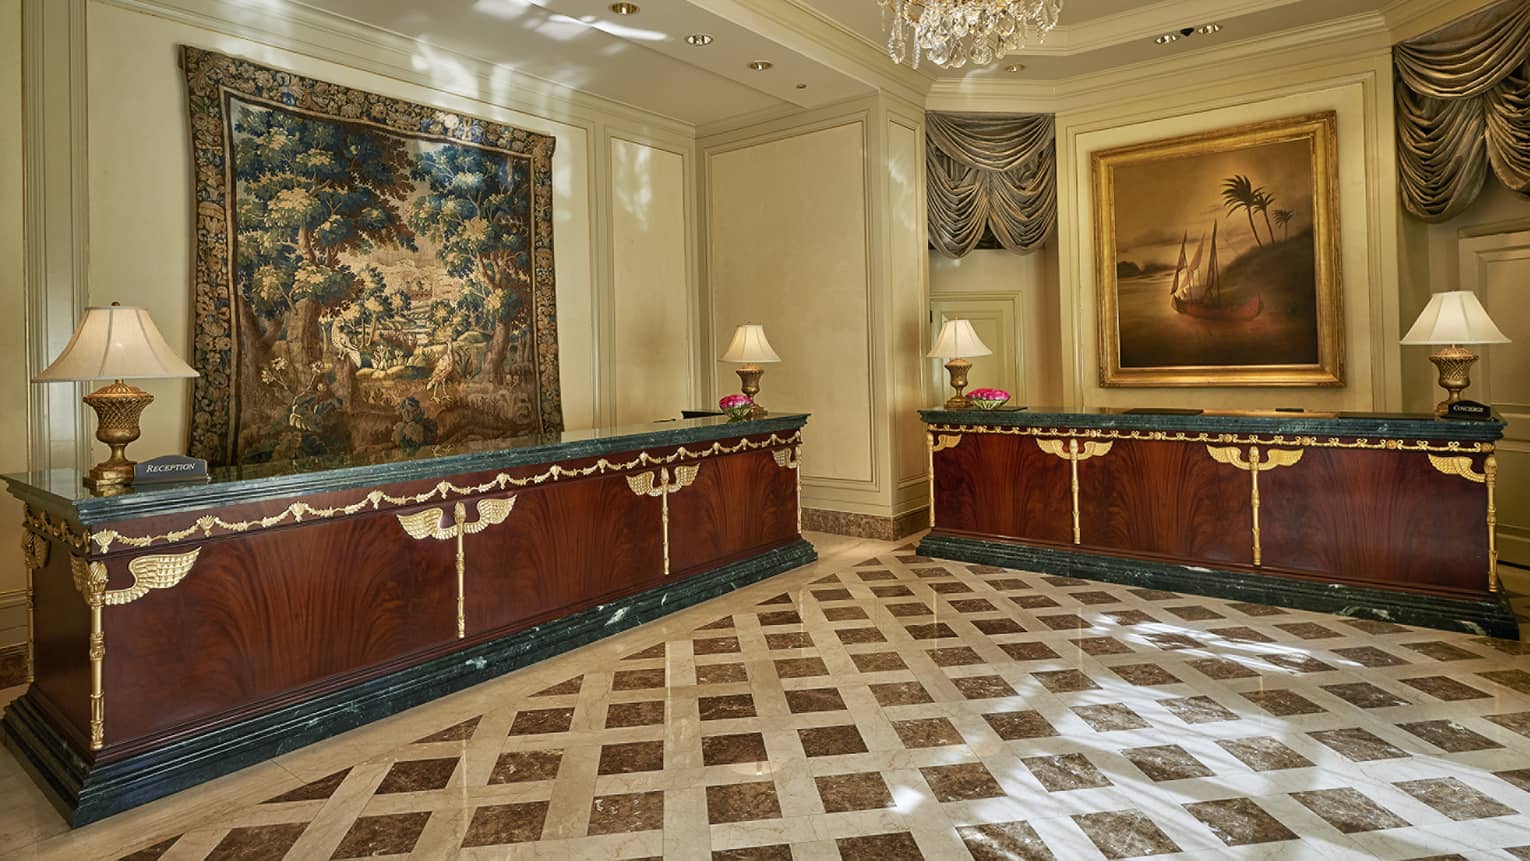 Hotel lobby with tapestry, art and marble flooring